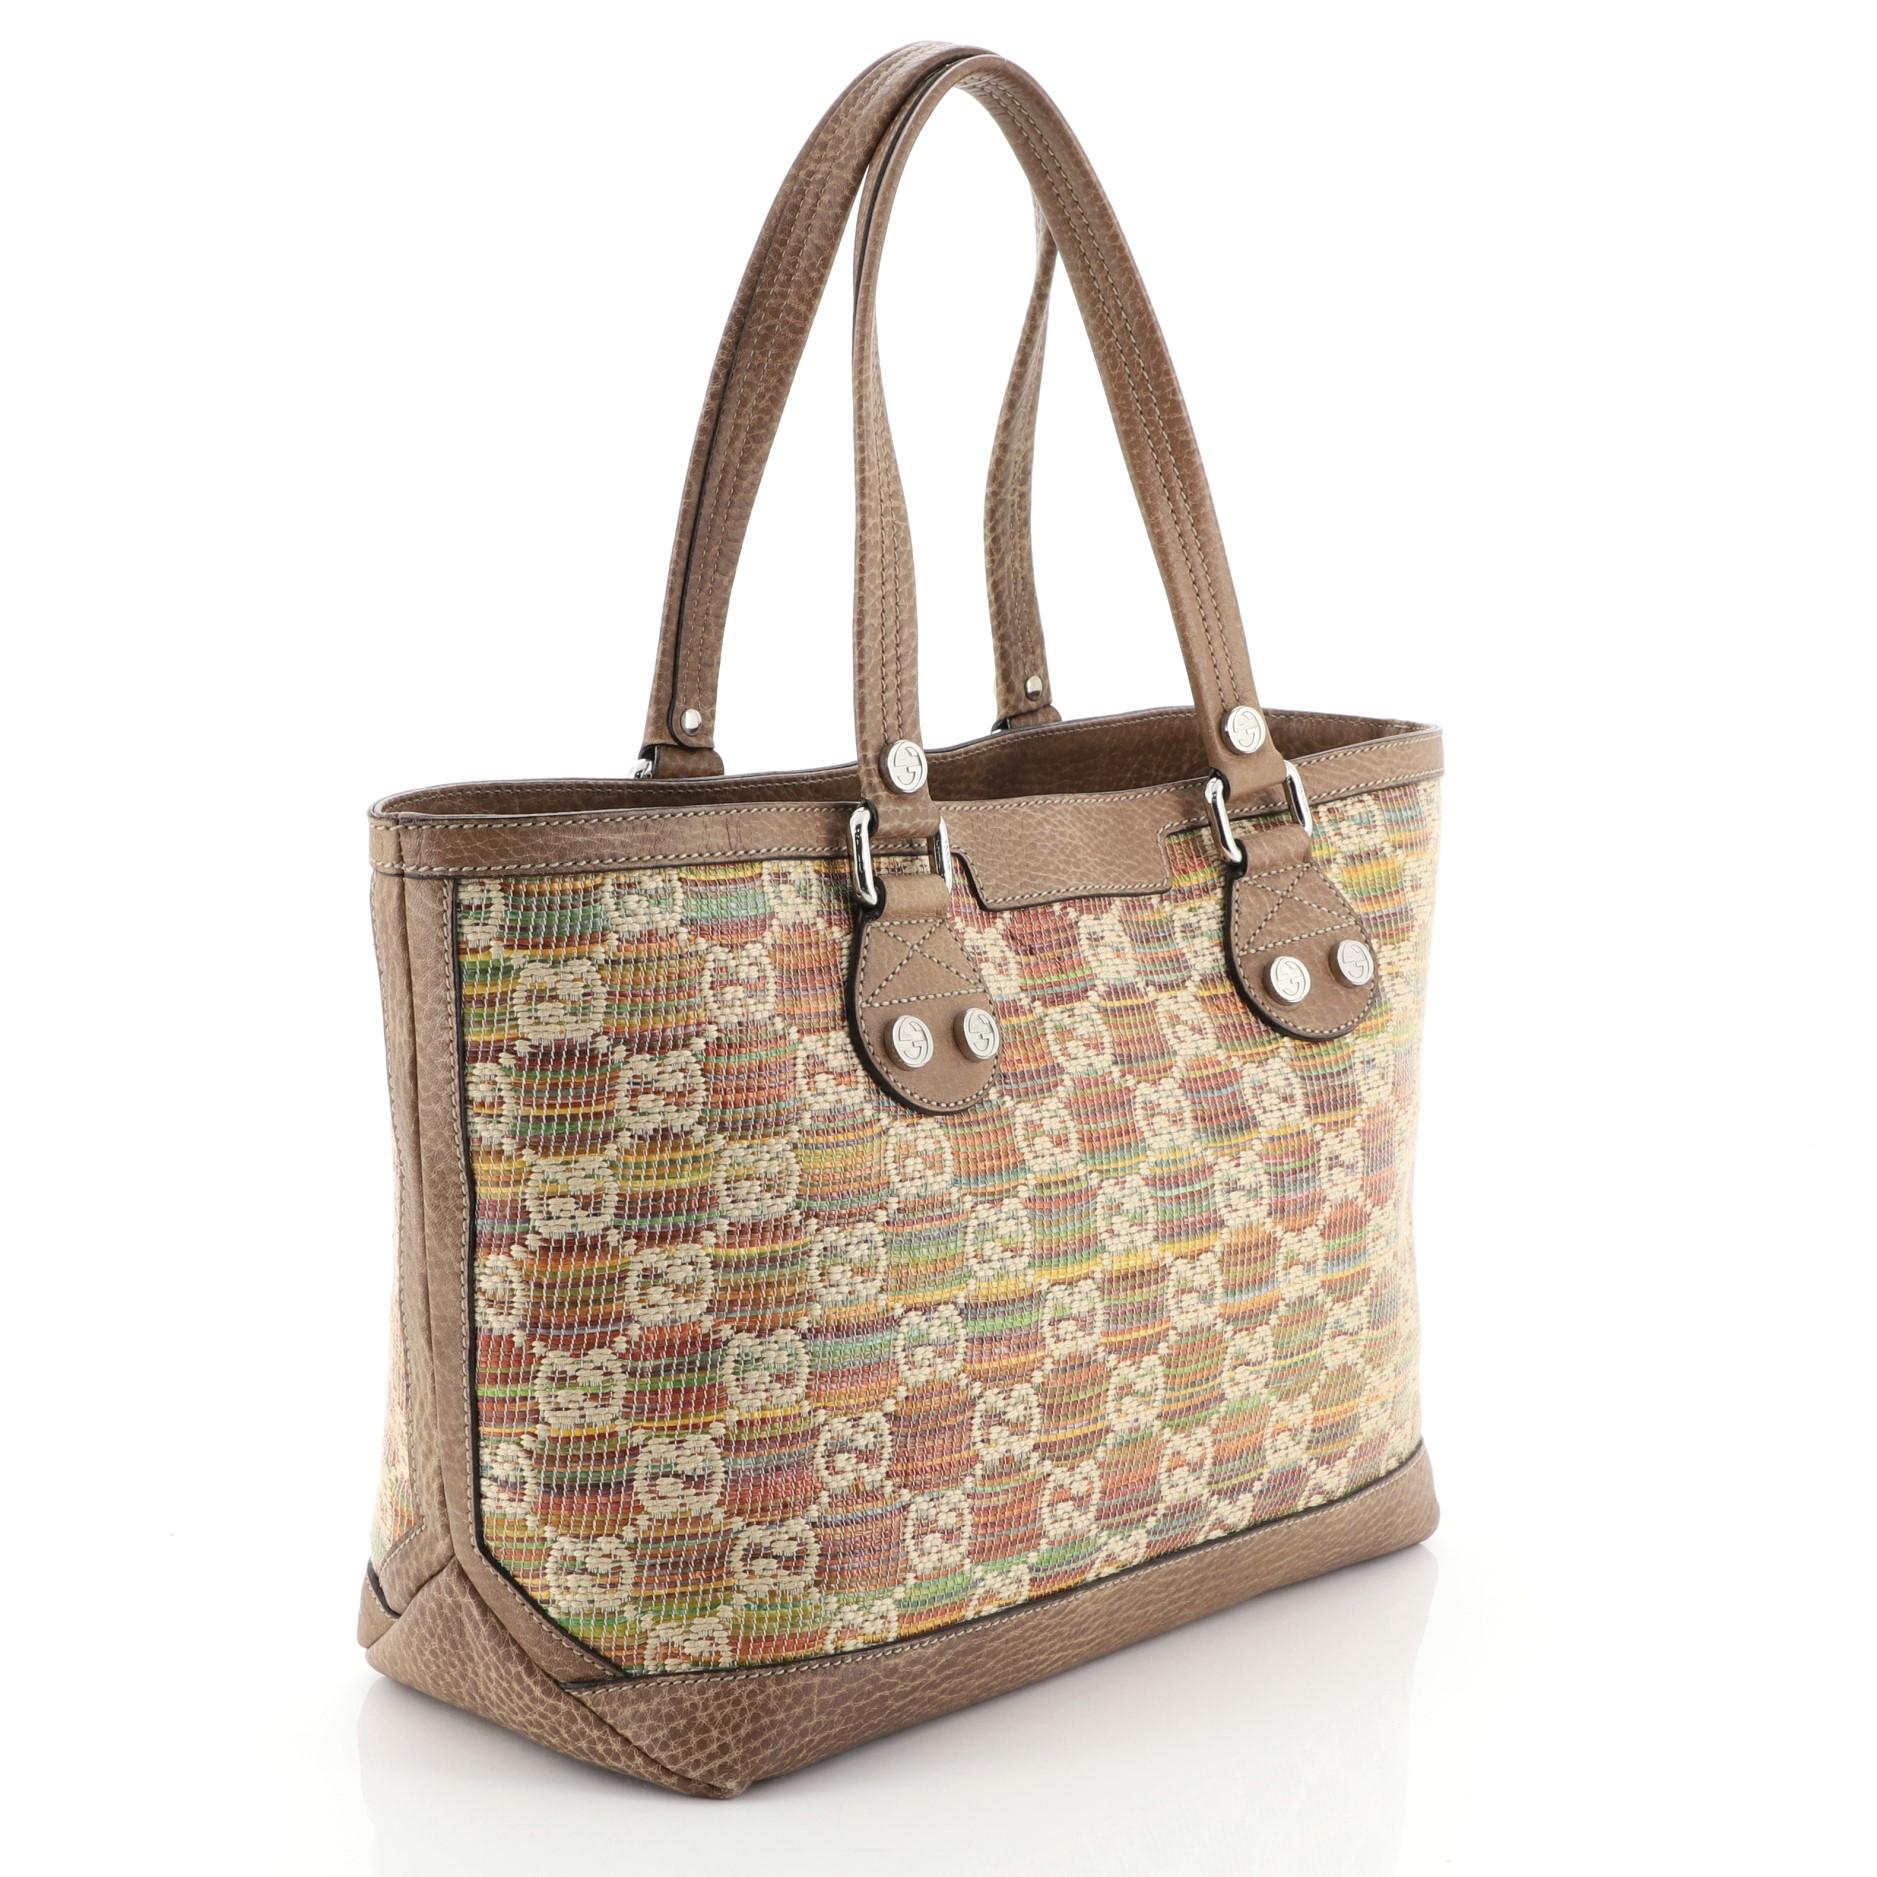 This Gucci Sunset Tote Straw Libeccio GG Canvas Small, crafted in multicolor red, brown straw Libeccio GG canvas, features dual leather handles with interlocking GG studs, brown leather trims and silver-tone hardware. Its hook closure opens to a